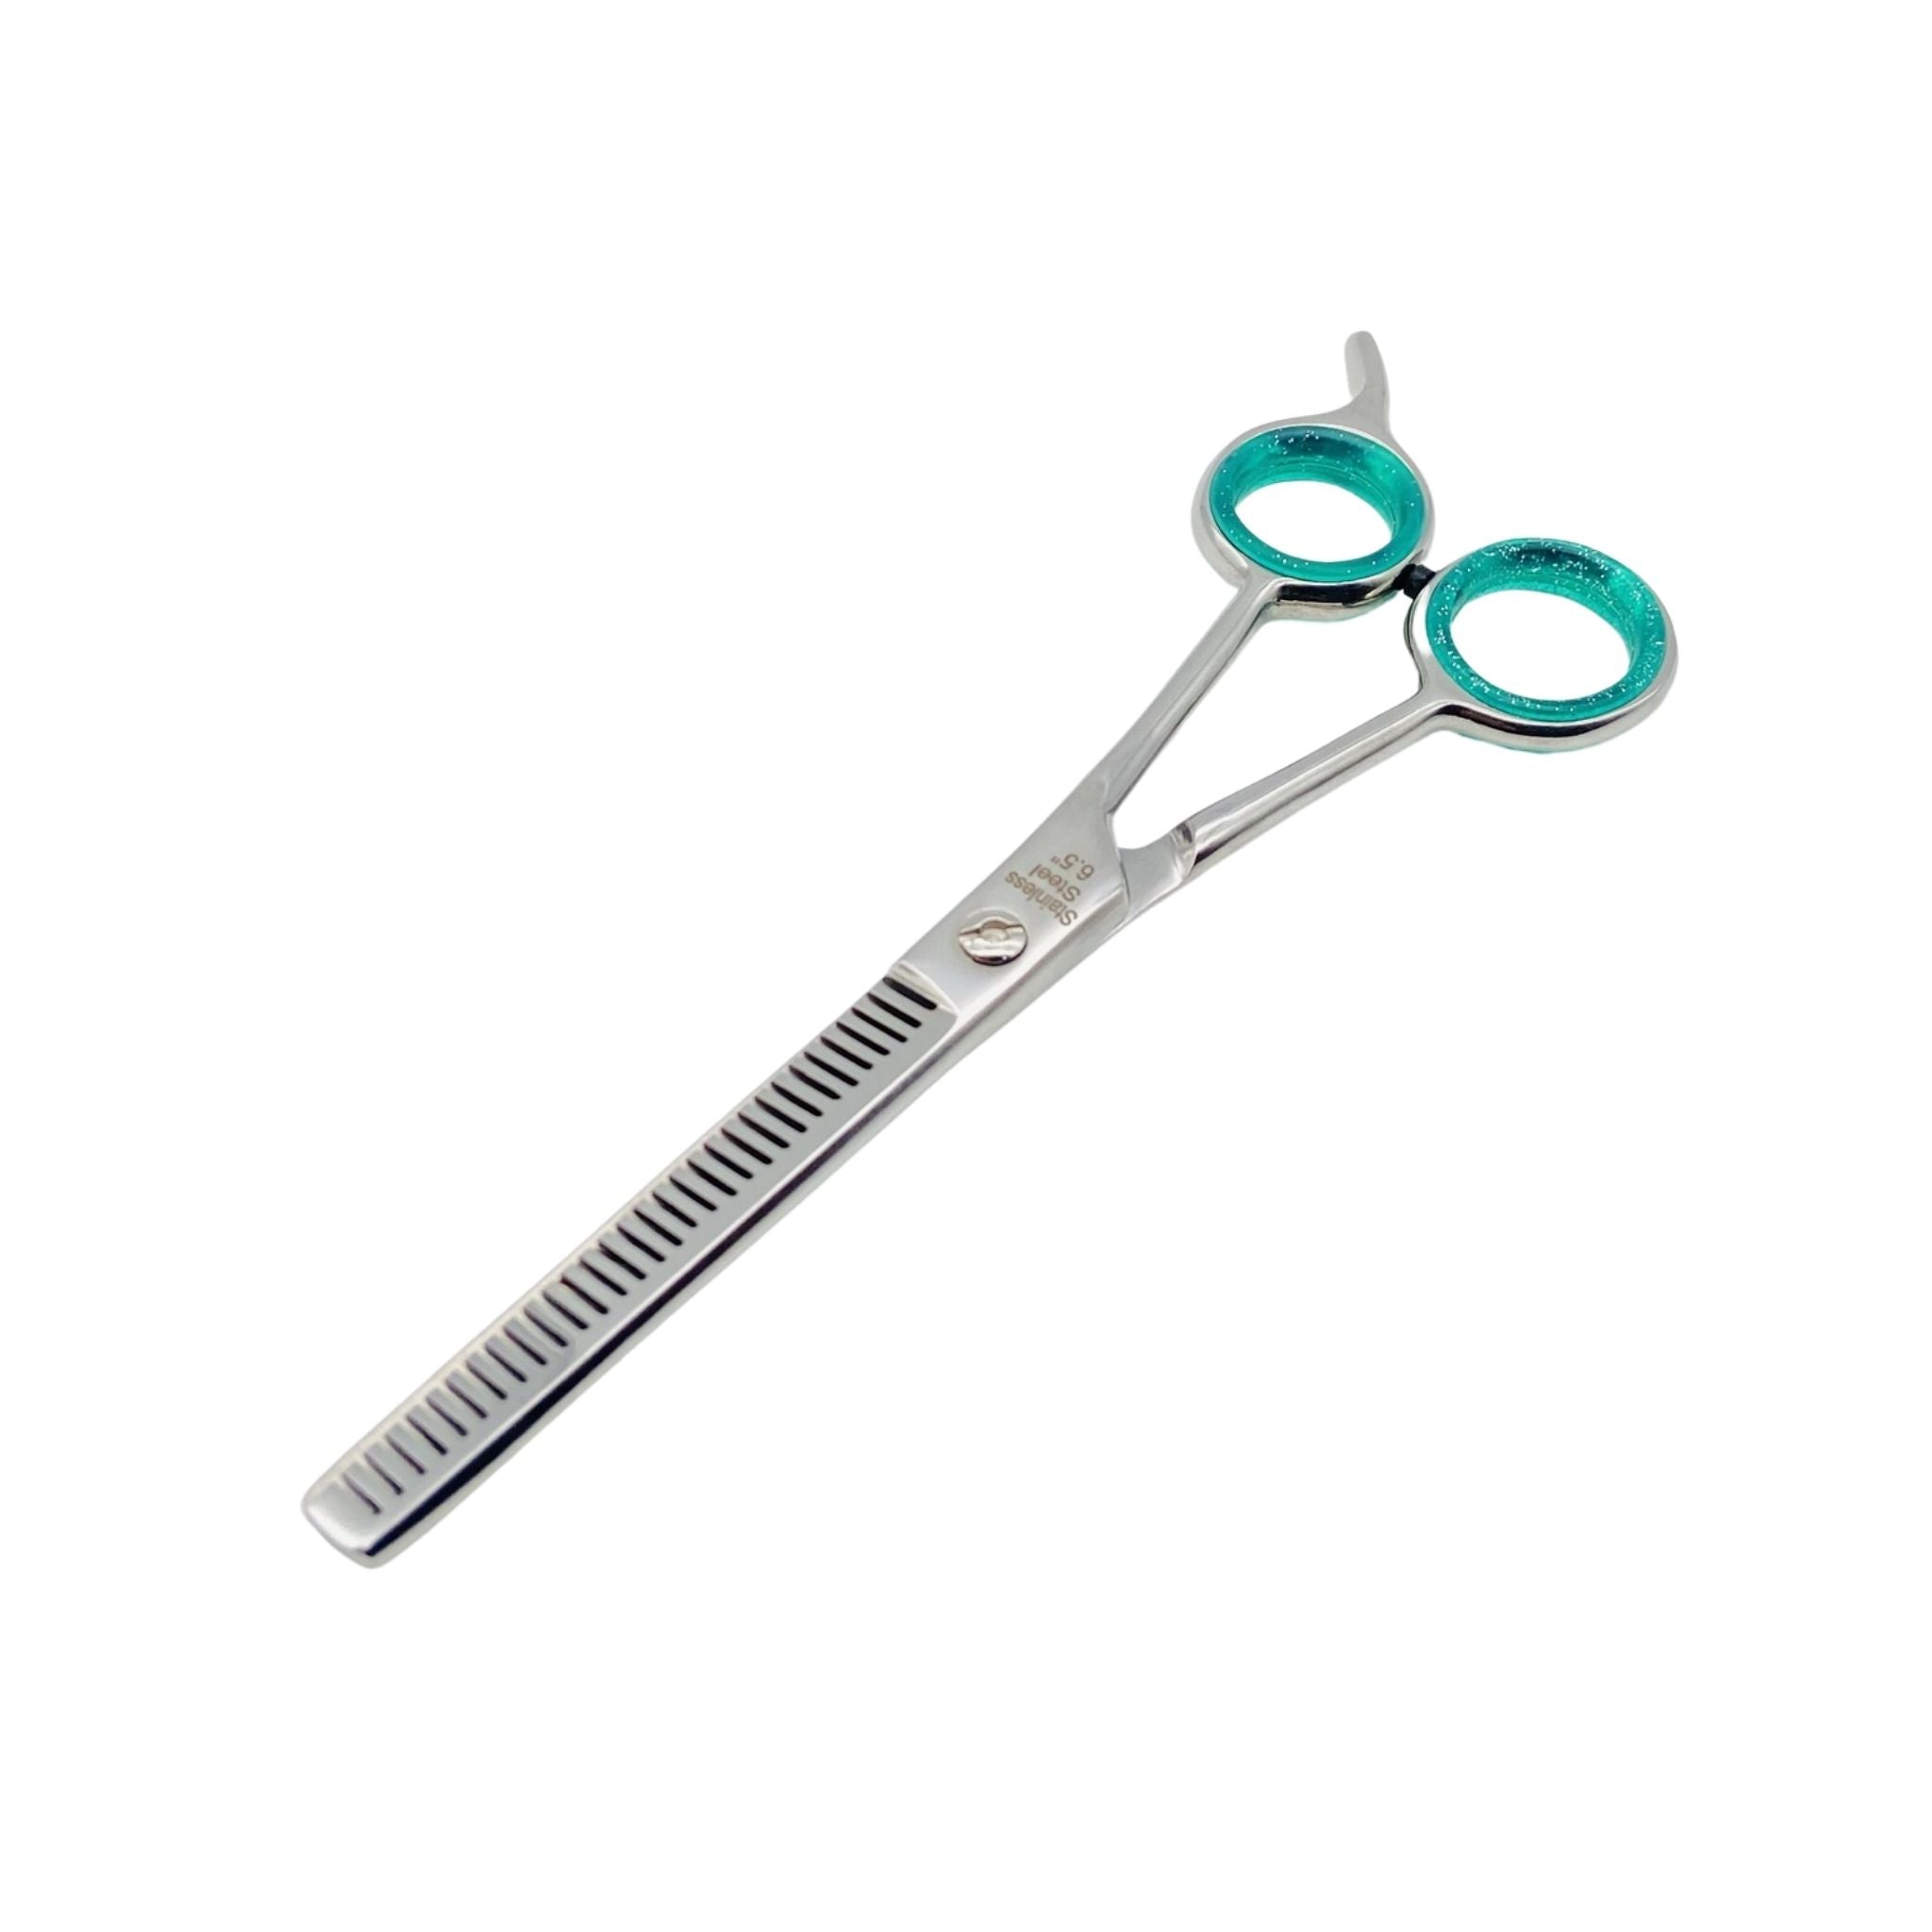 Hair Scissors - Hair Thinning Scissors 6.5'' Inch - Excellent Quality